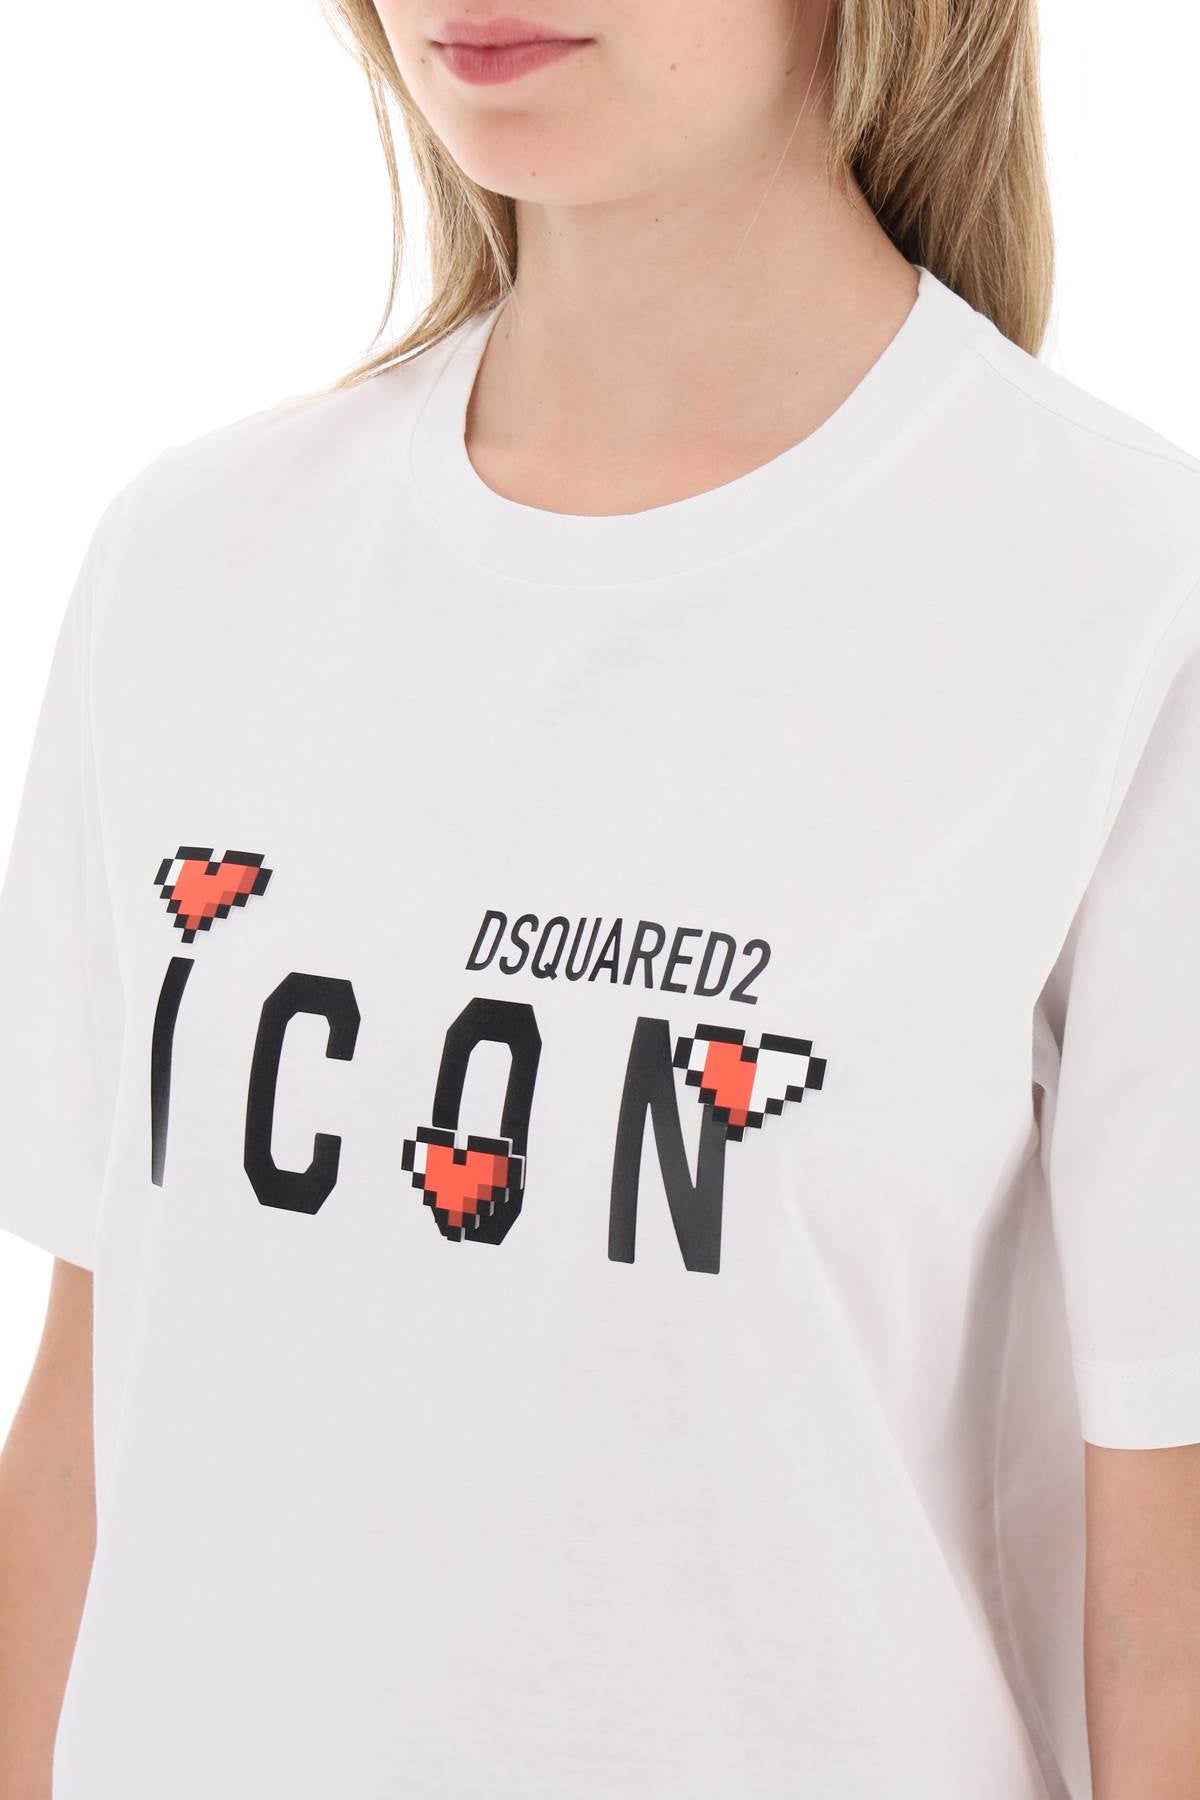 Dsquared2 'icon game lover' t-shirt-3